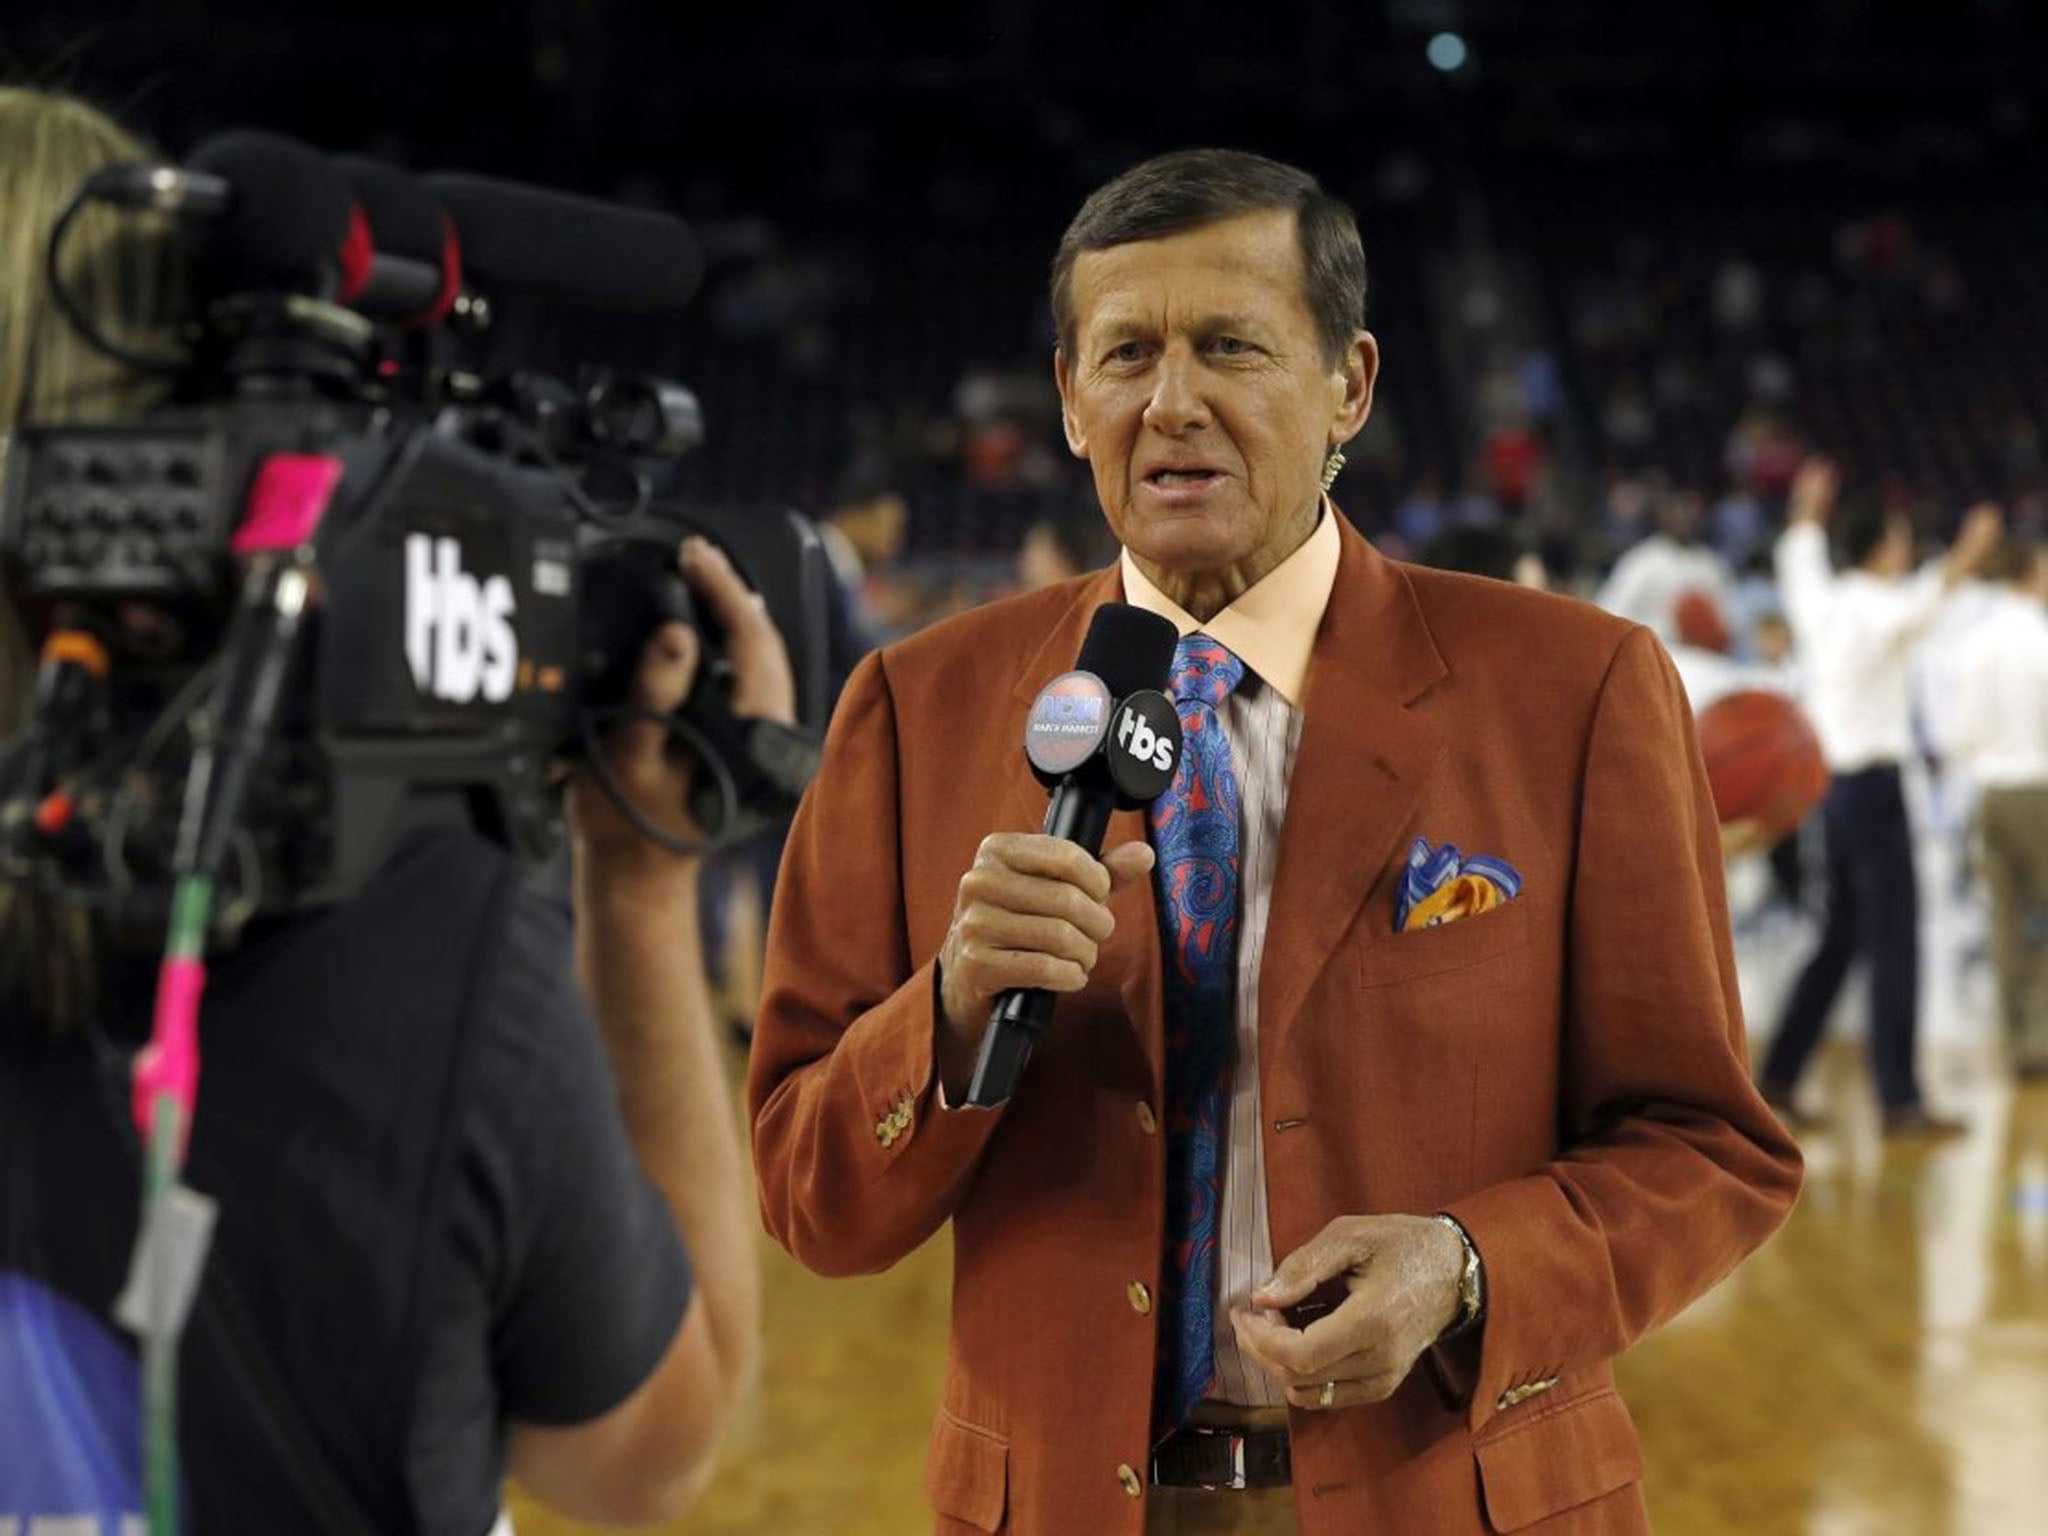 Craig Sager reporting at a college basketball tournament in April. The broadcaster announced earlier this year that his cancer had returned